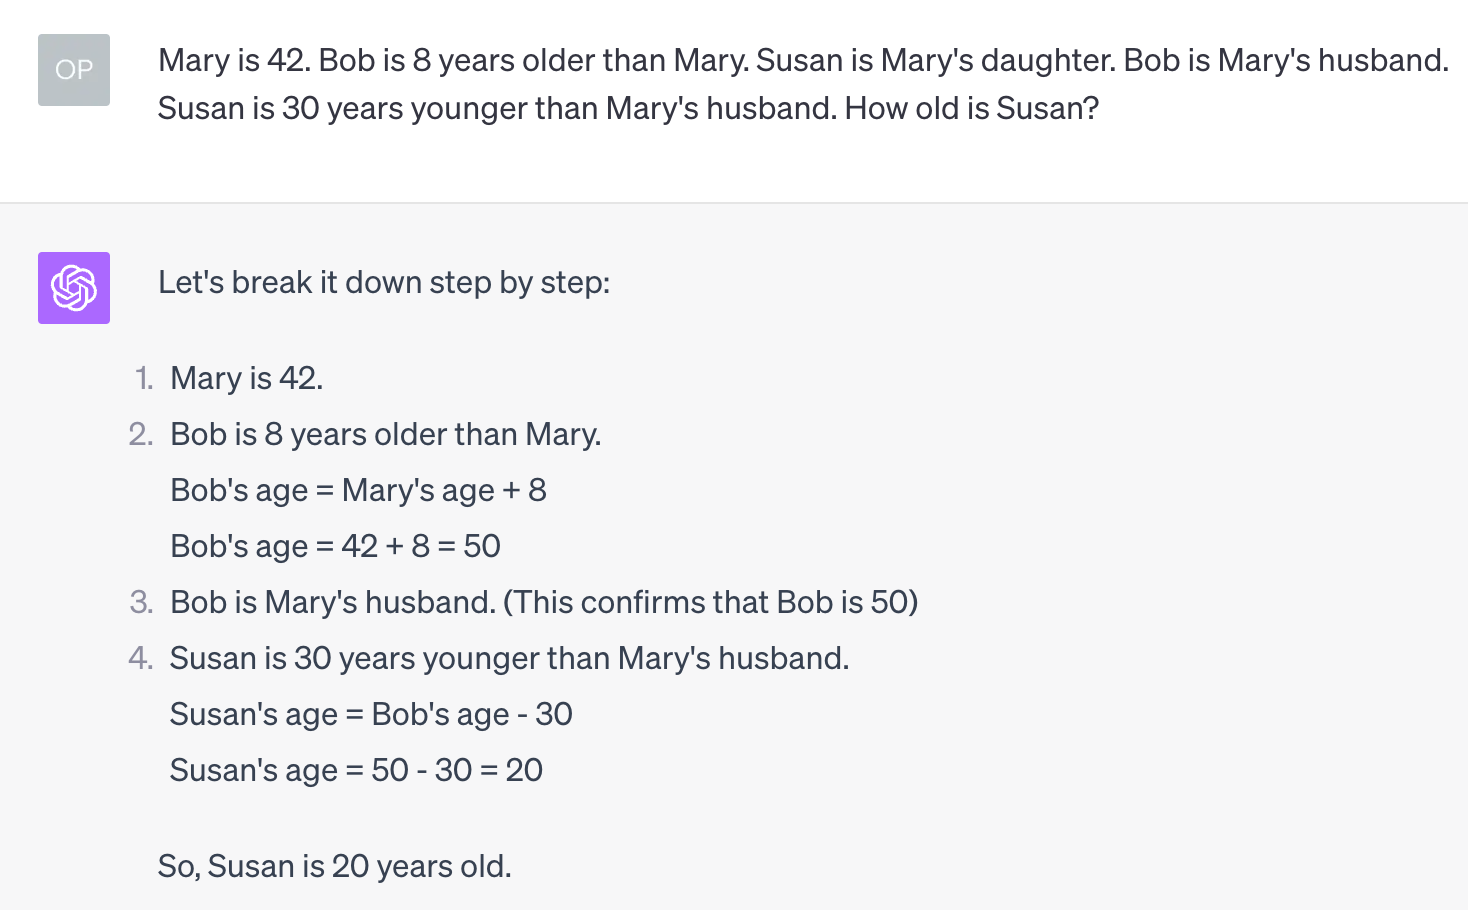 A chatGPT chat. Question is: 'Mary is 42. Bob is 8 years older than Mary. Susan is Mary's daughter. Bob is Mary's husband. Susan is 30 years younger than Mary's husband. How old is Susan?' Answer is: 'Let's break it down step by step: Mary is 42. Bob is 8 years older than Mary.Bob's age = Mary's age + 8Bob's age = 42 + 8 = 50 Bob is Mary's husband. (This confirms that Bob is 50)Susan is 30 years younger than Mary's husband.Susan's age = Bob's age - 30Susan's age = 50 - 30 = 20 So, Susan is 20 years old.'